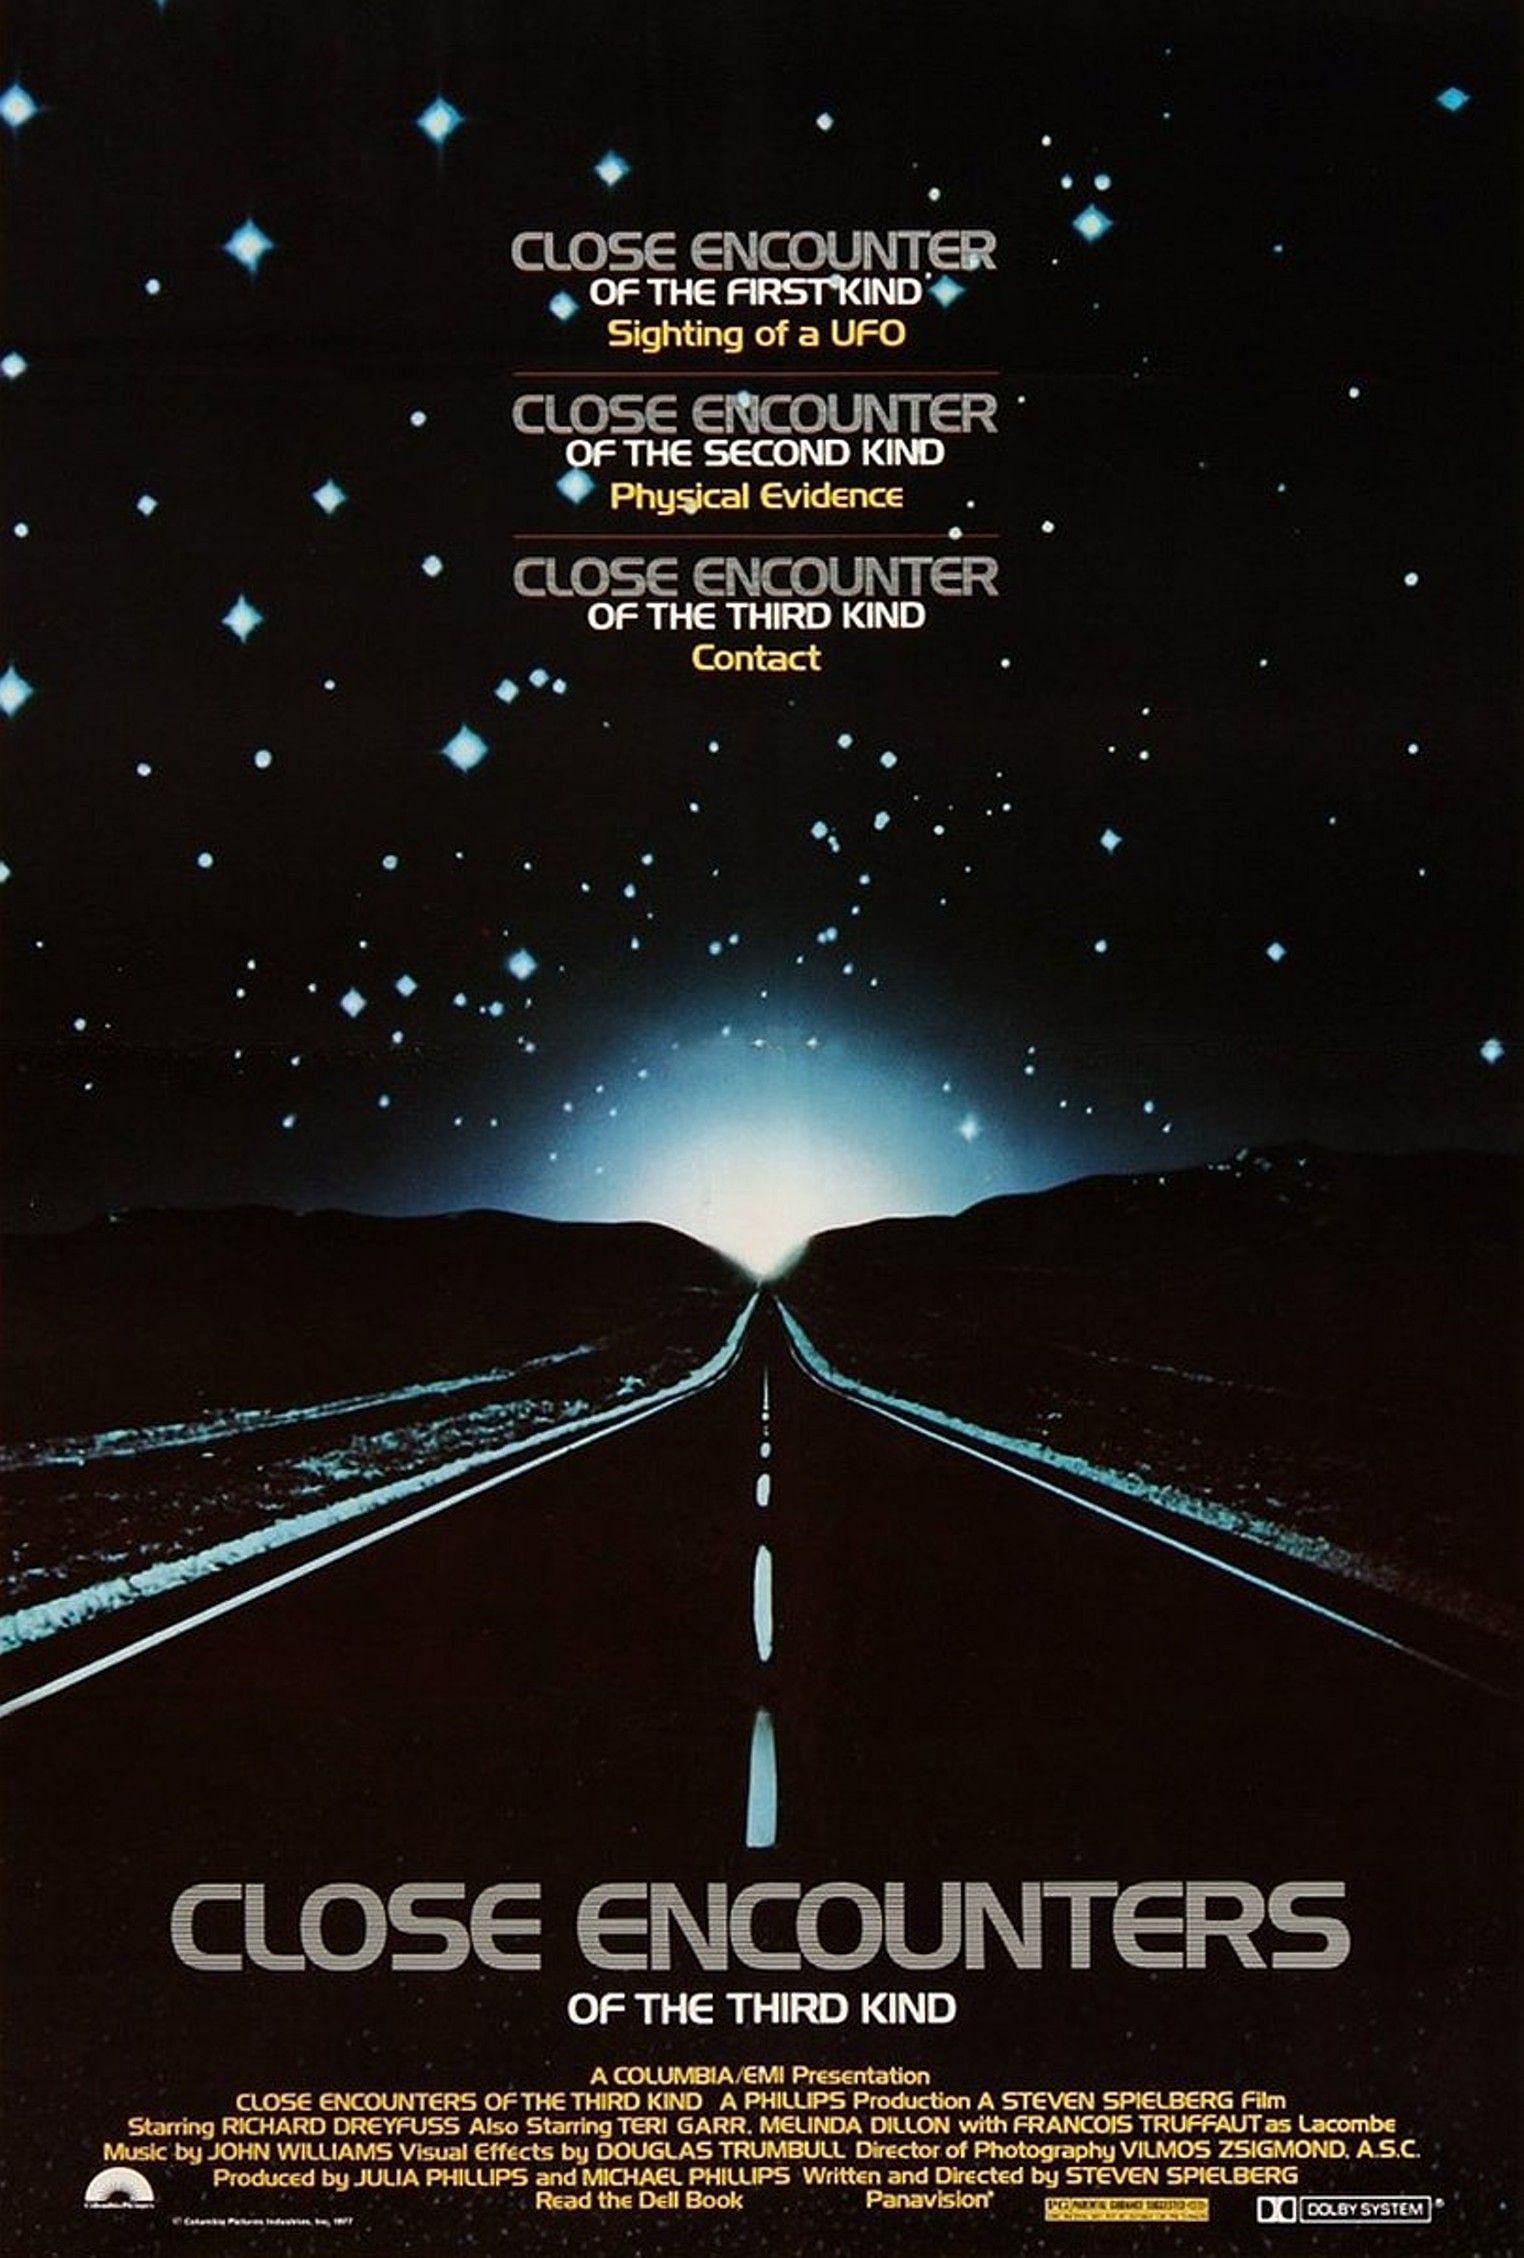 Close Encounters of the Third Kind (Image via Columbia Pictures)